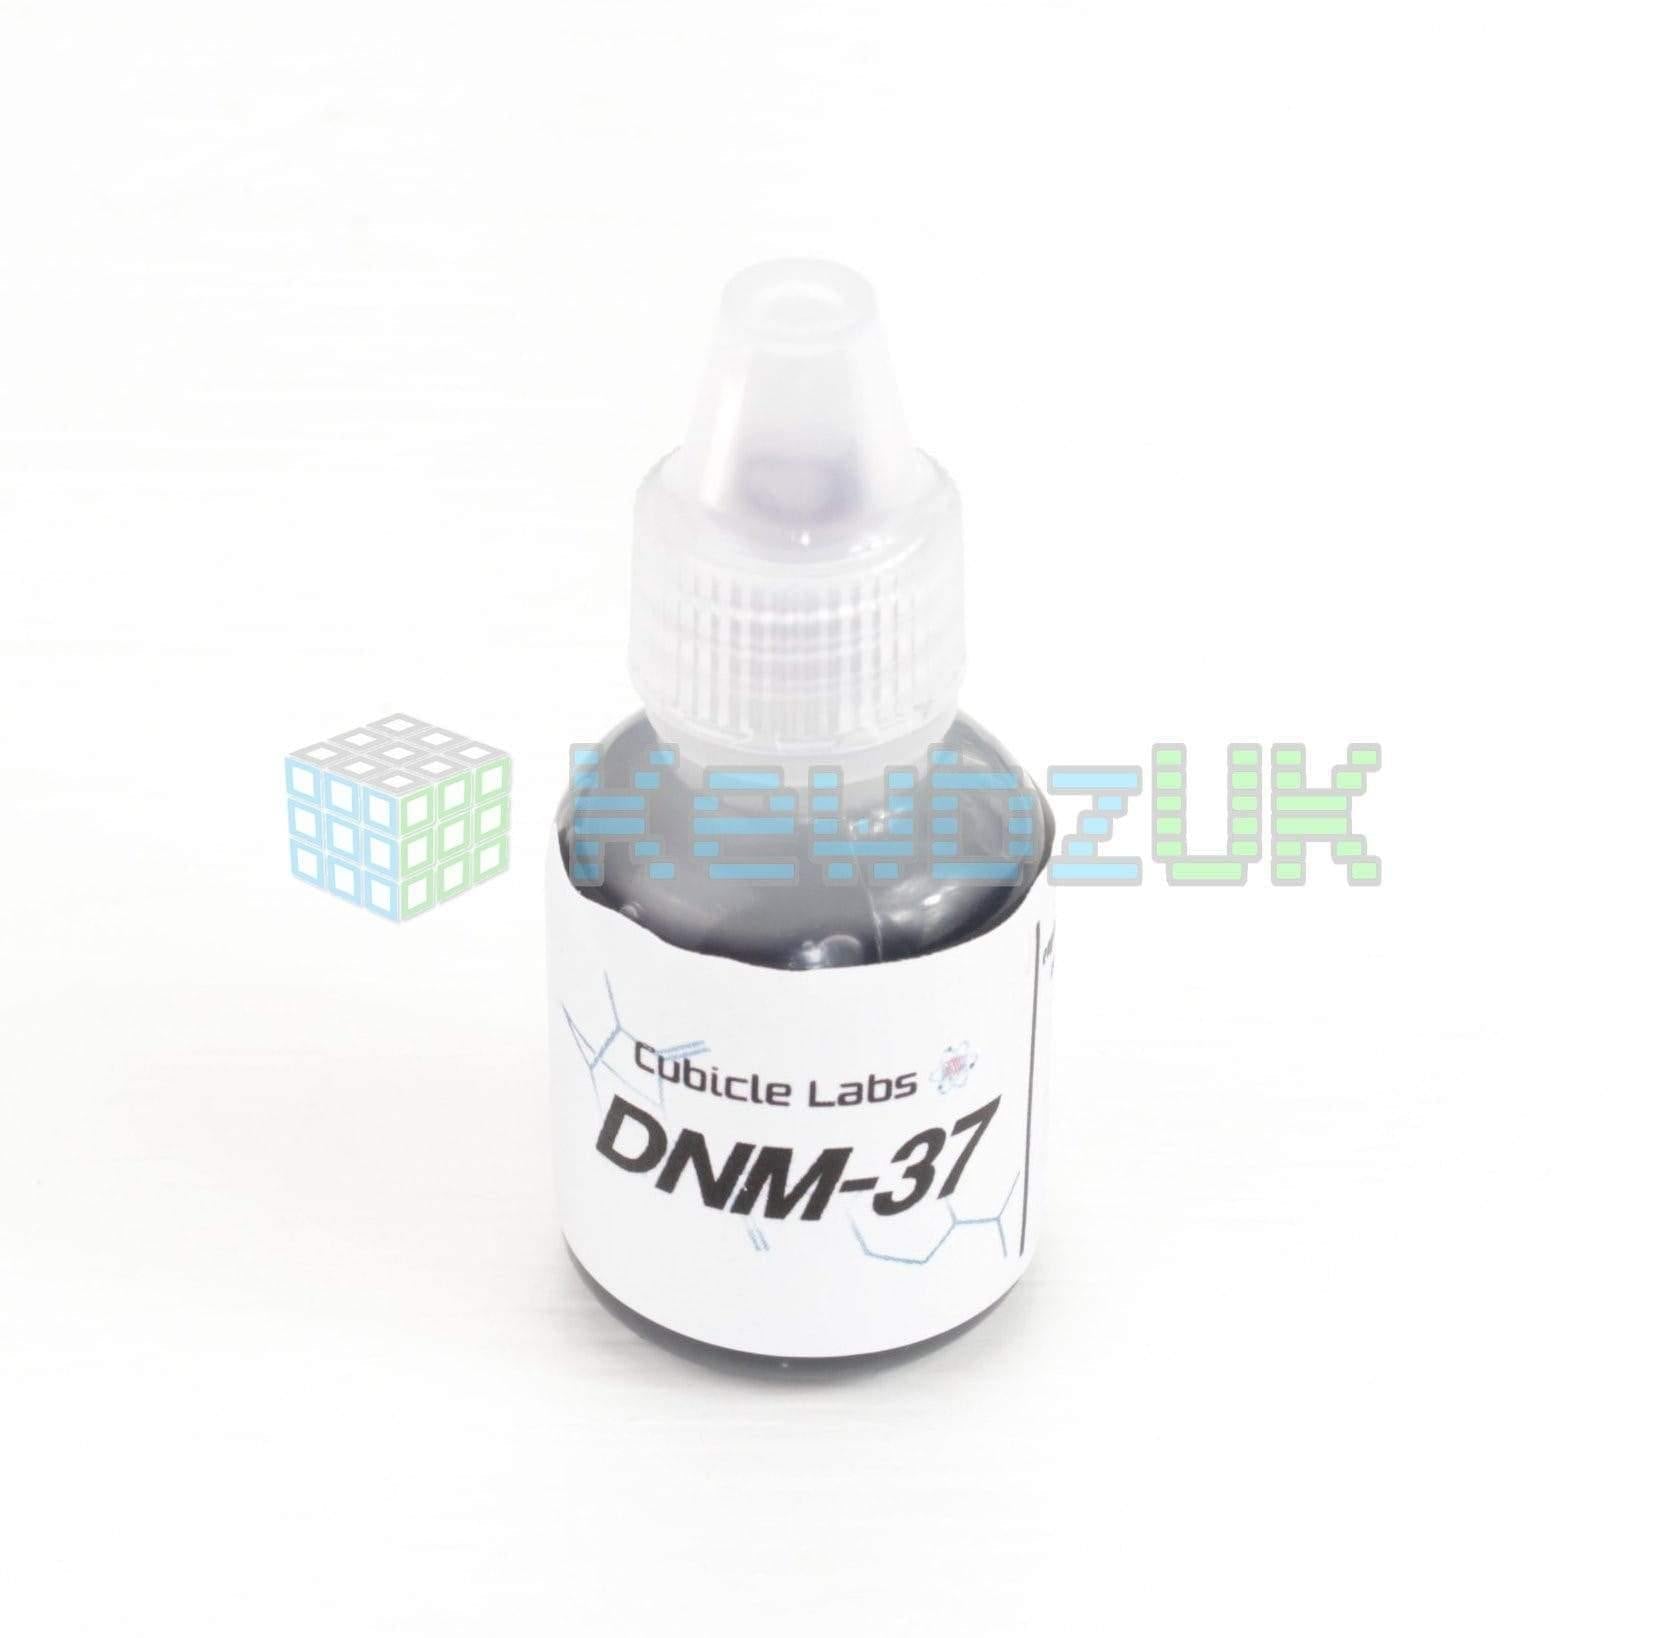 DNM-37 Speed Cube Lube - Water Based Lubricant - Cubicle Labs - UK Stock at KewbzUK